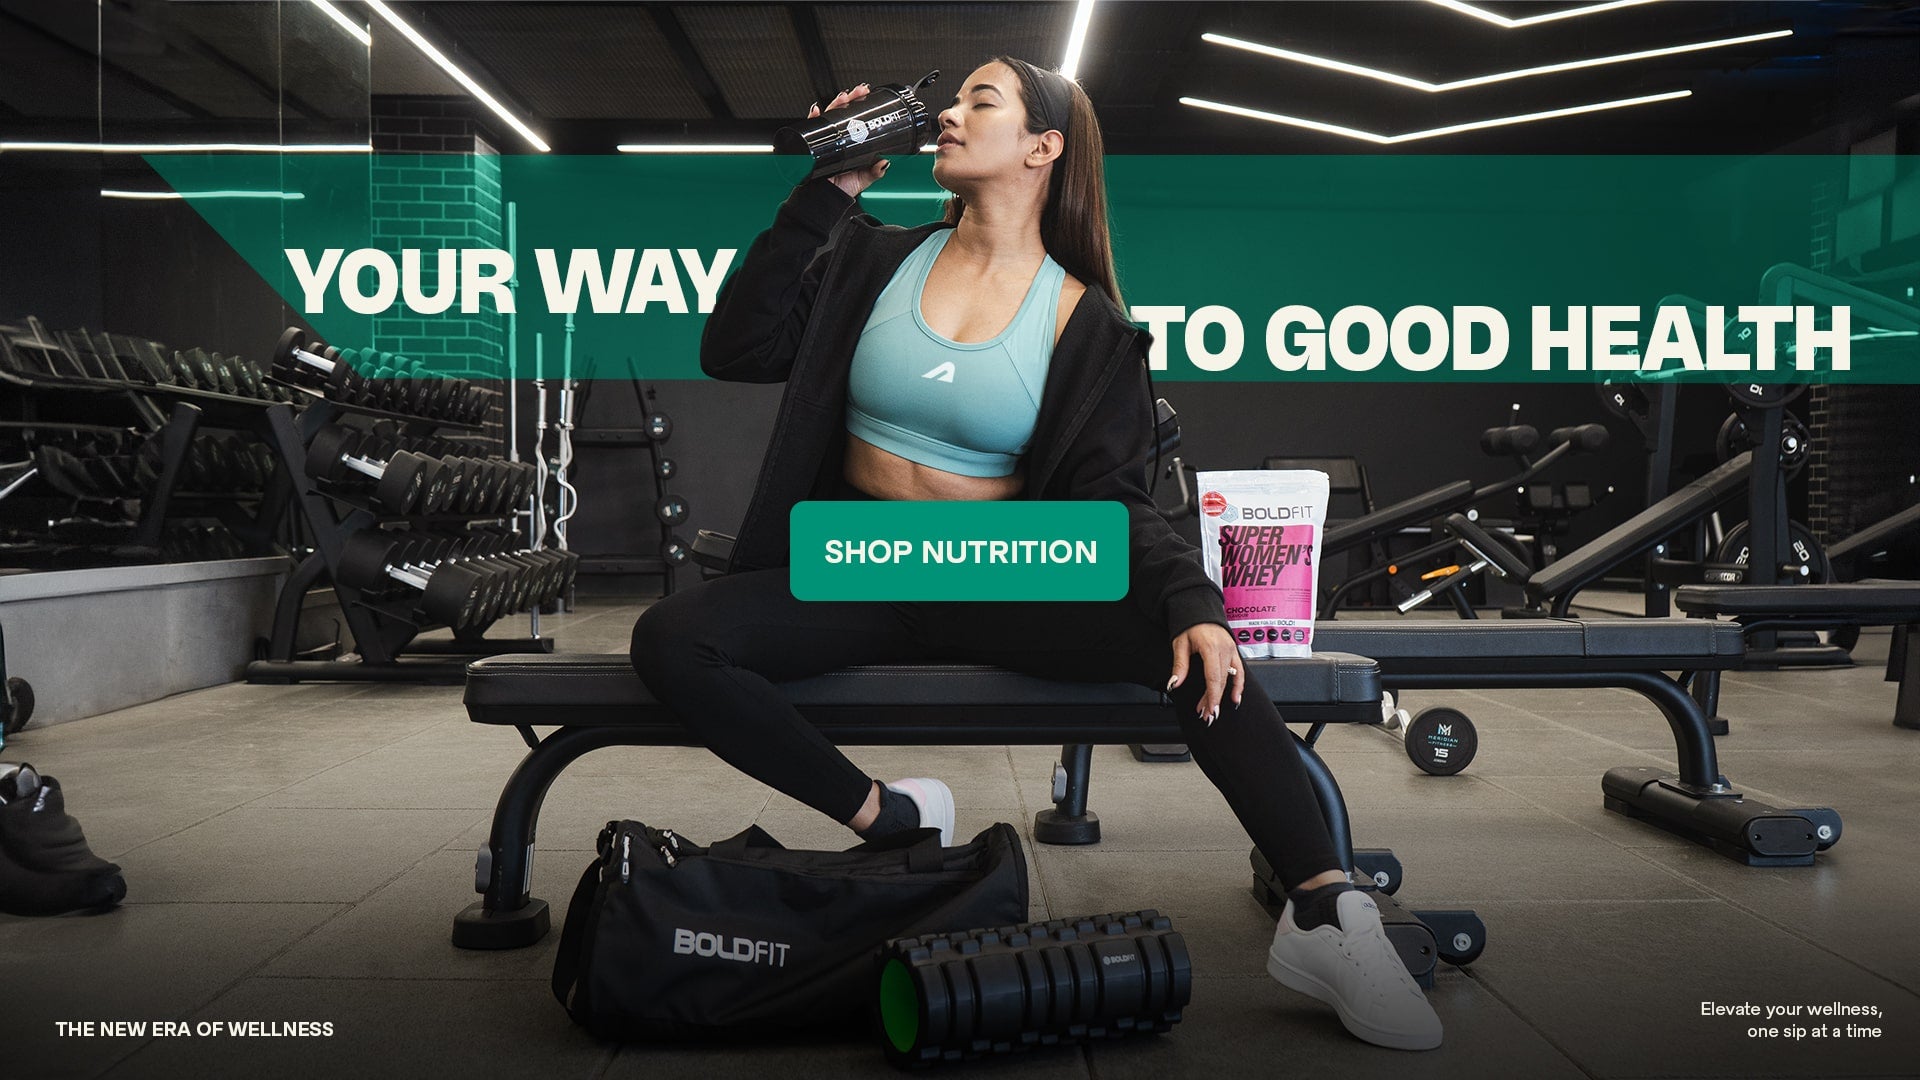 Boldfit, Made for the Bold, Health & Fitness